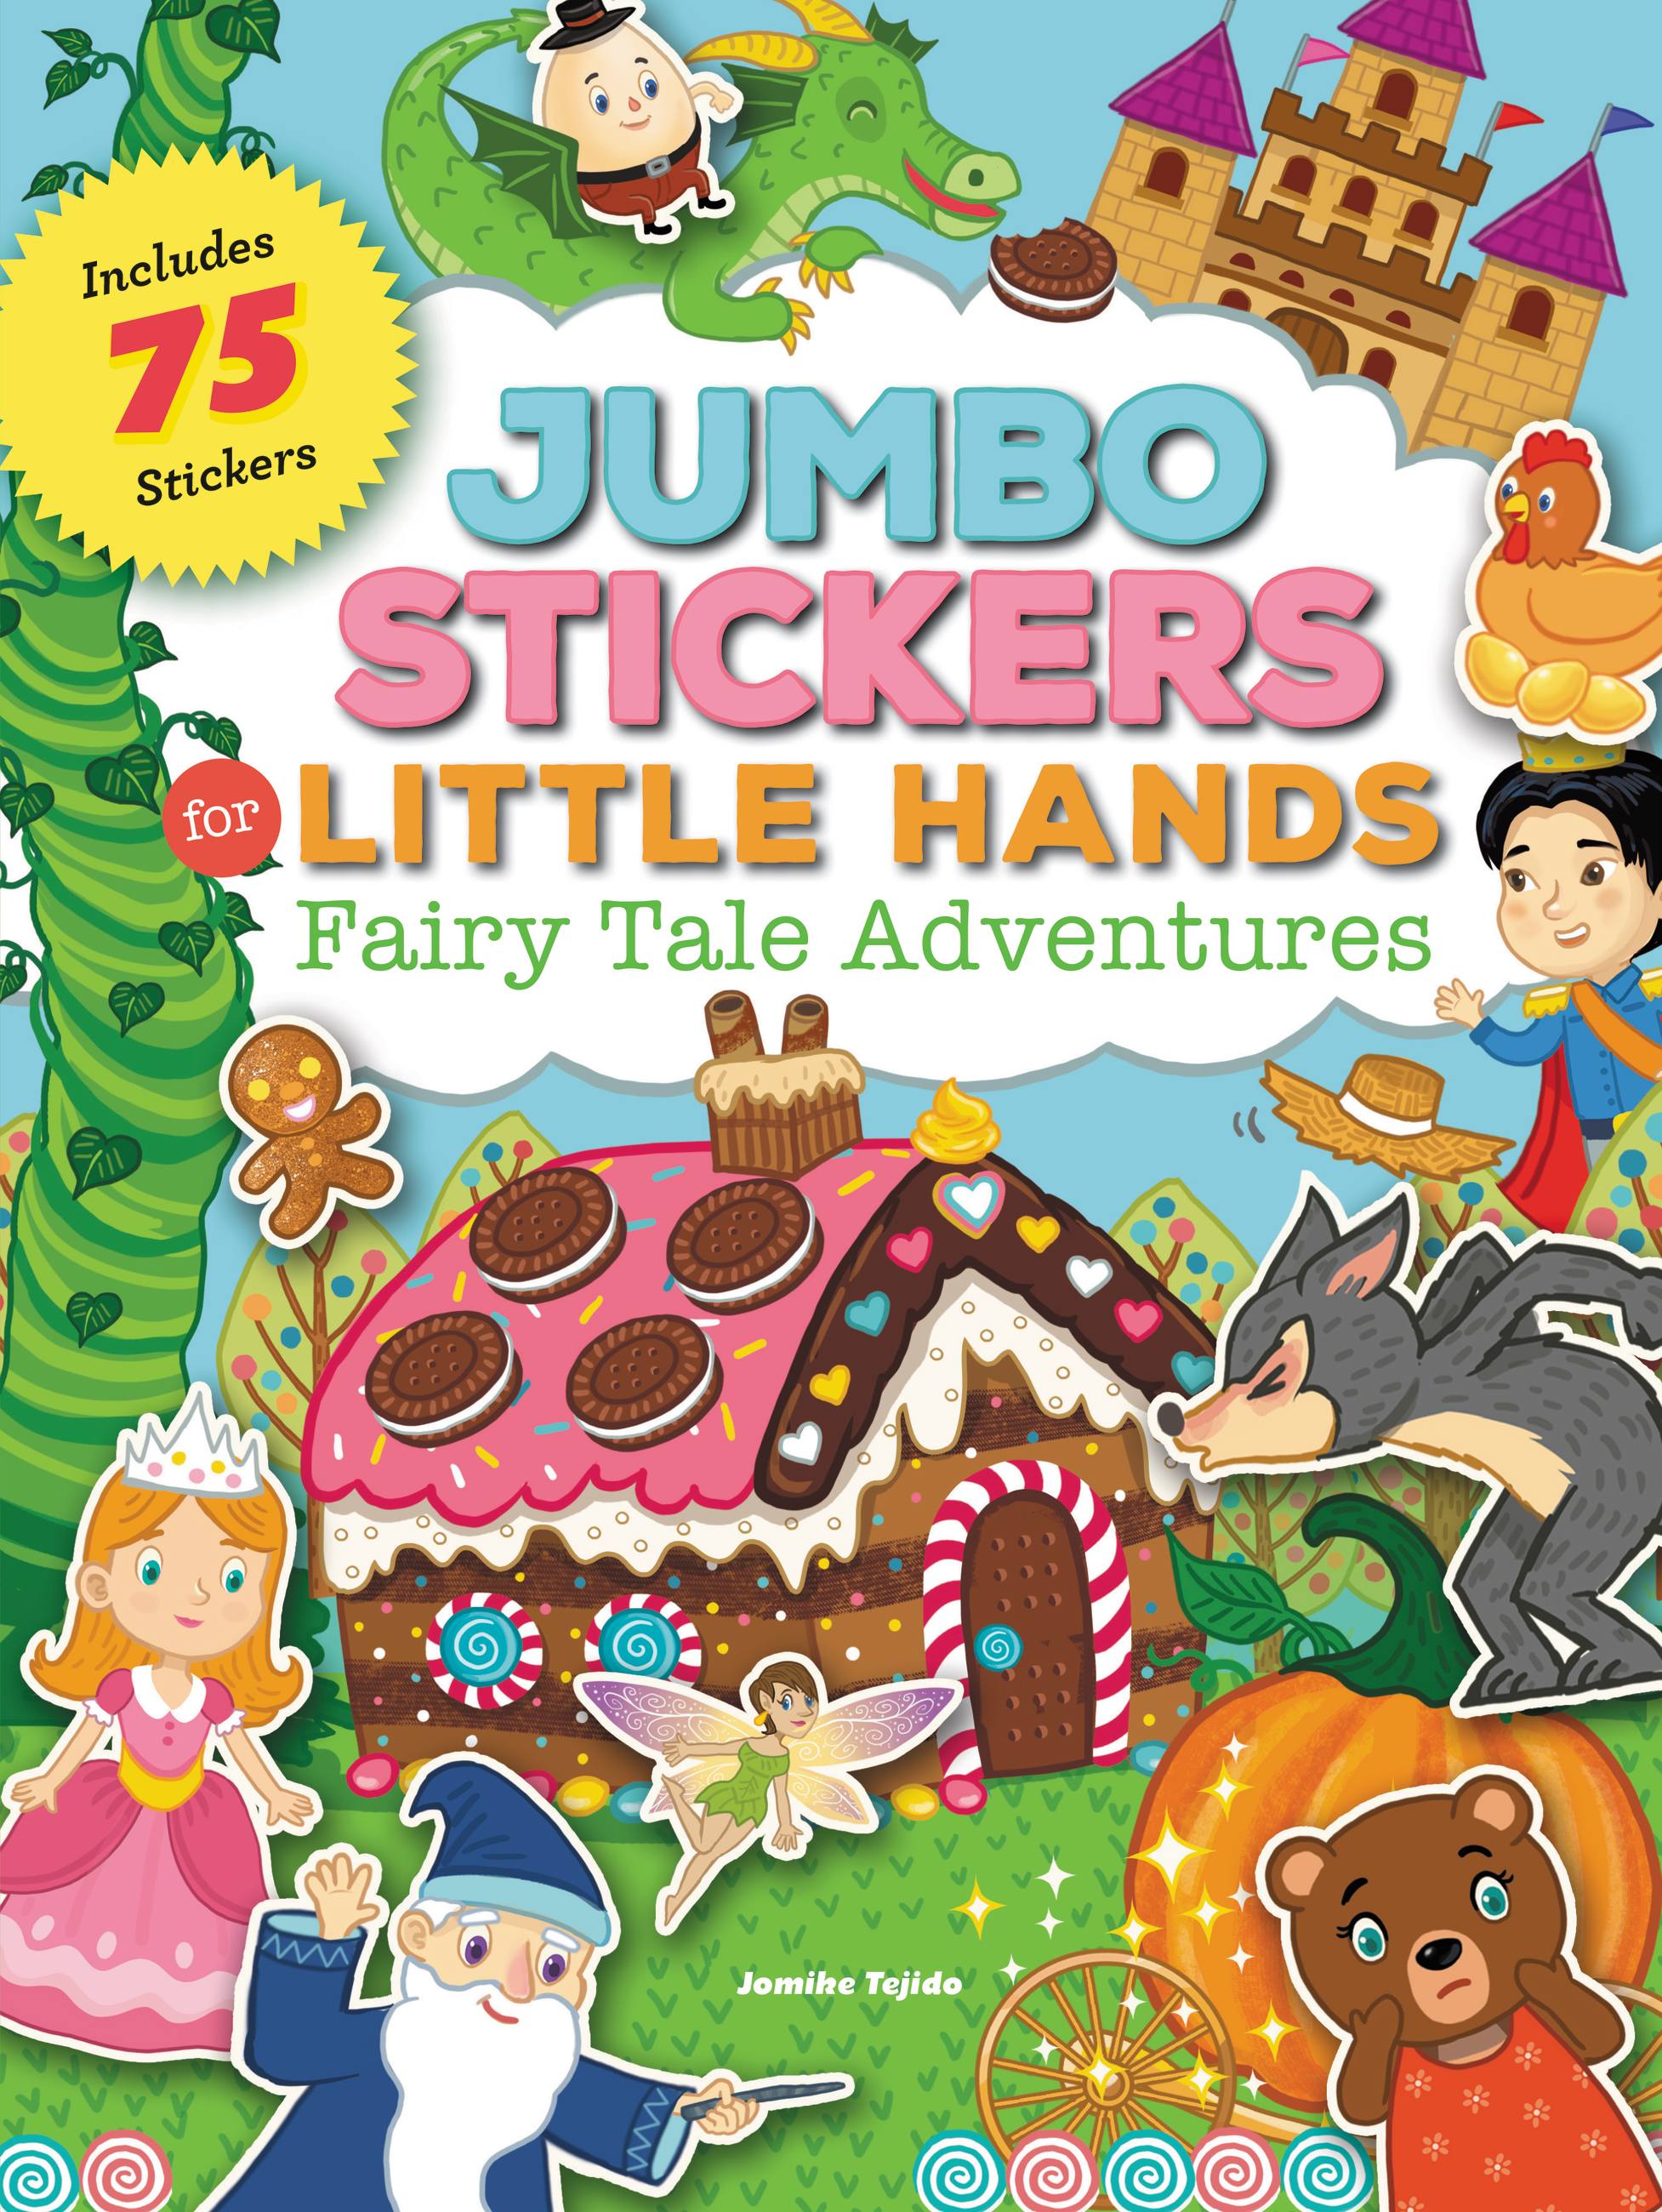 Fairy Tale Adventures (Jumbo Stickers for Little Hands): Includes 75 Stickers